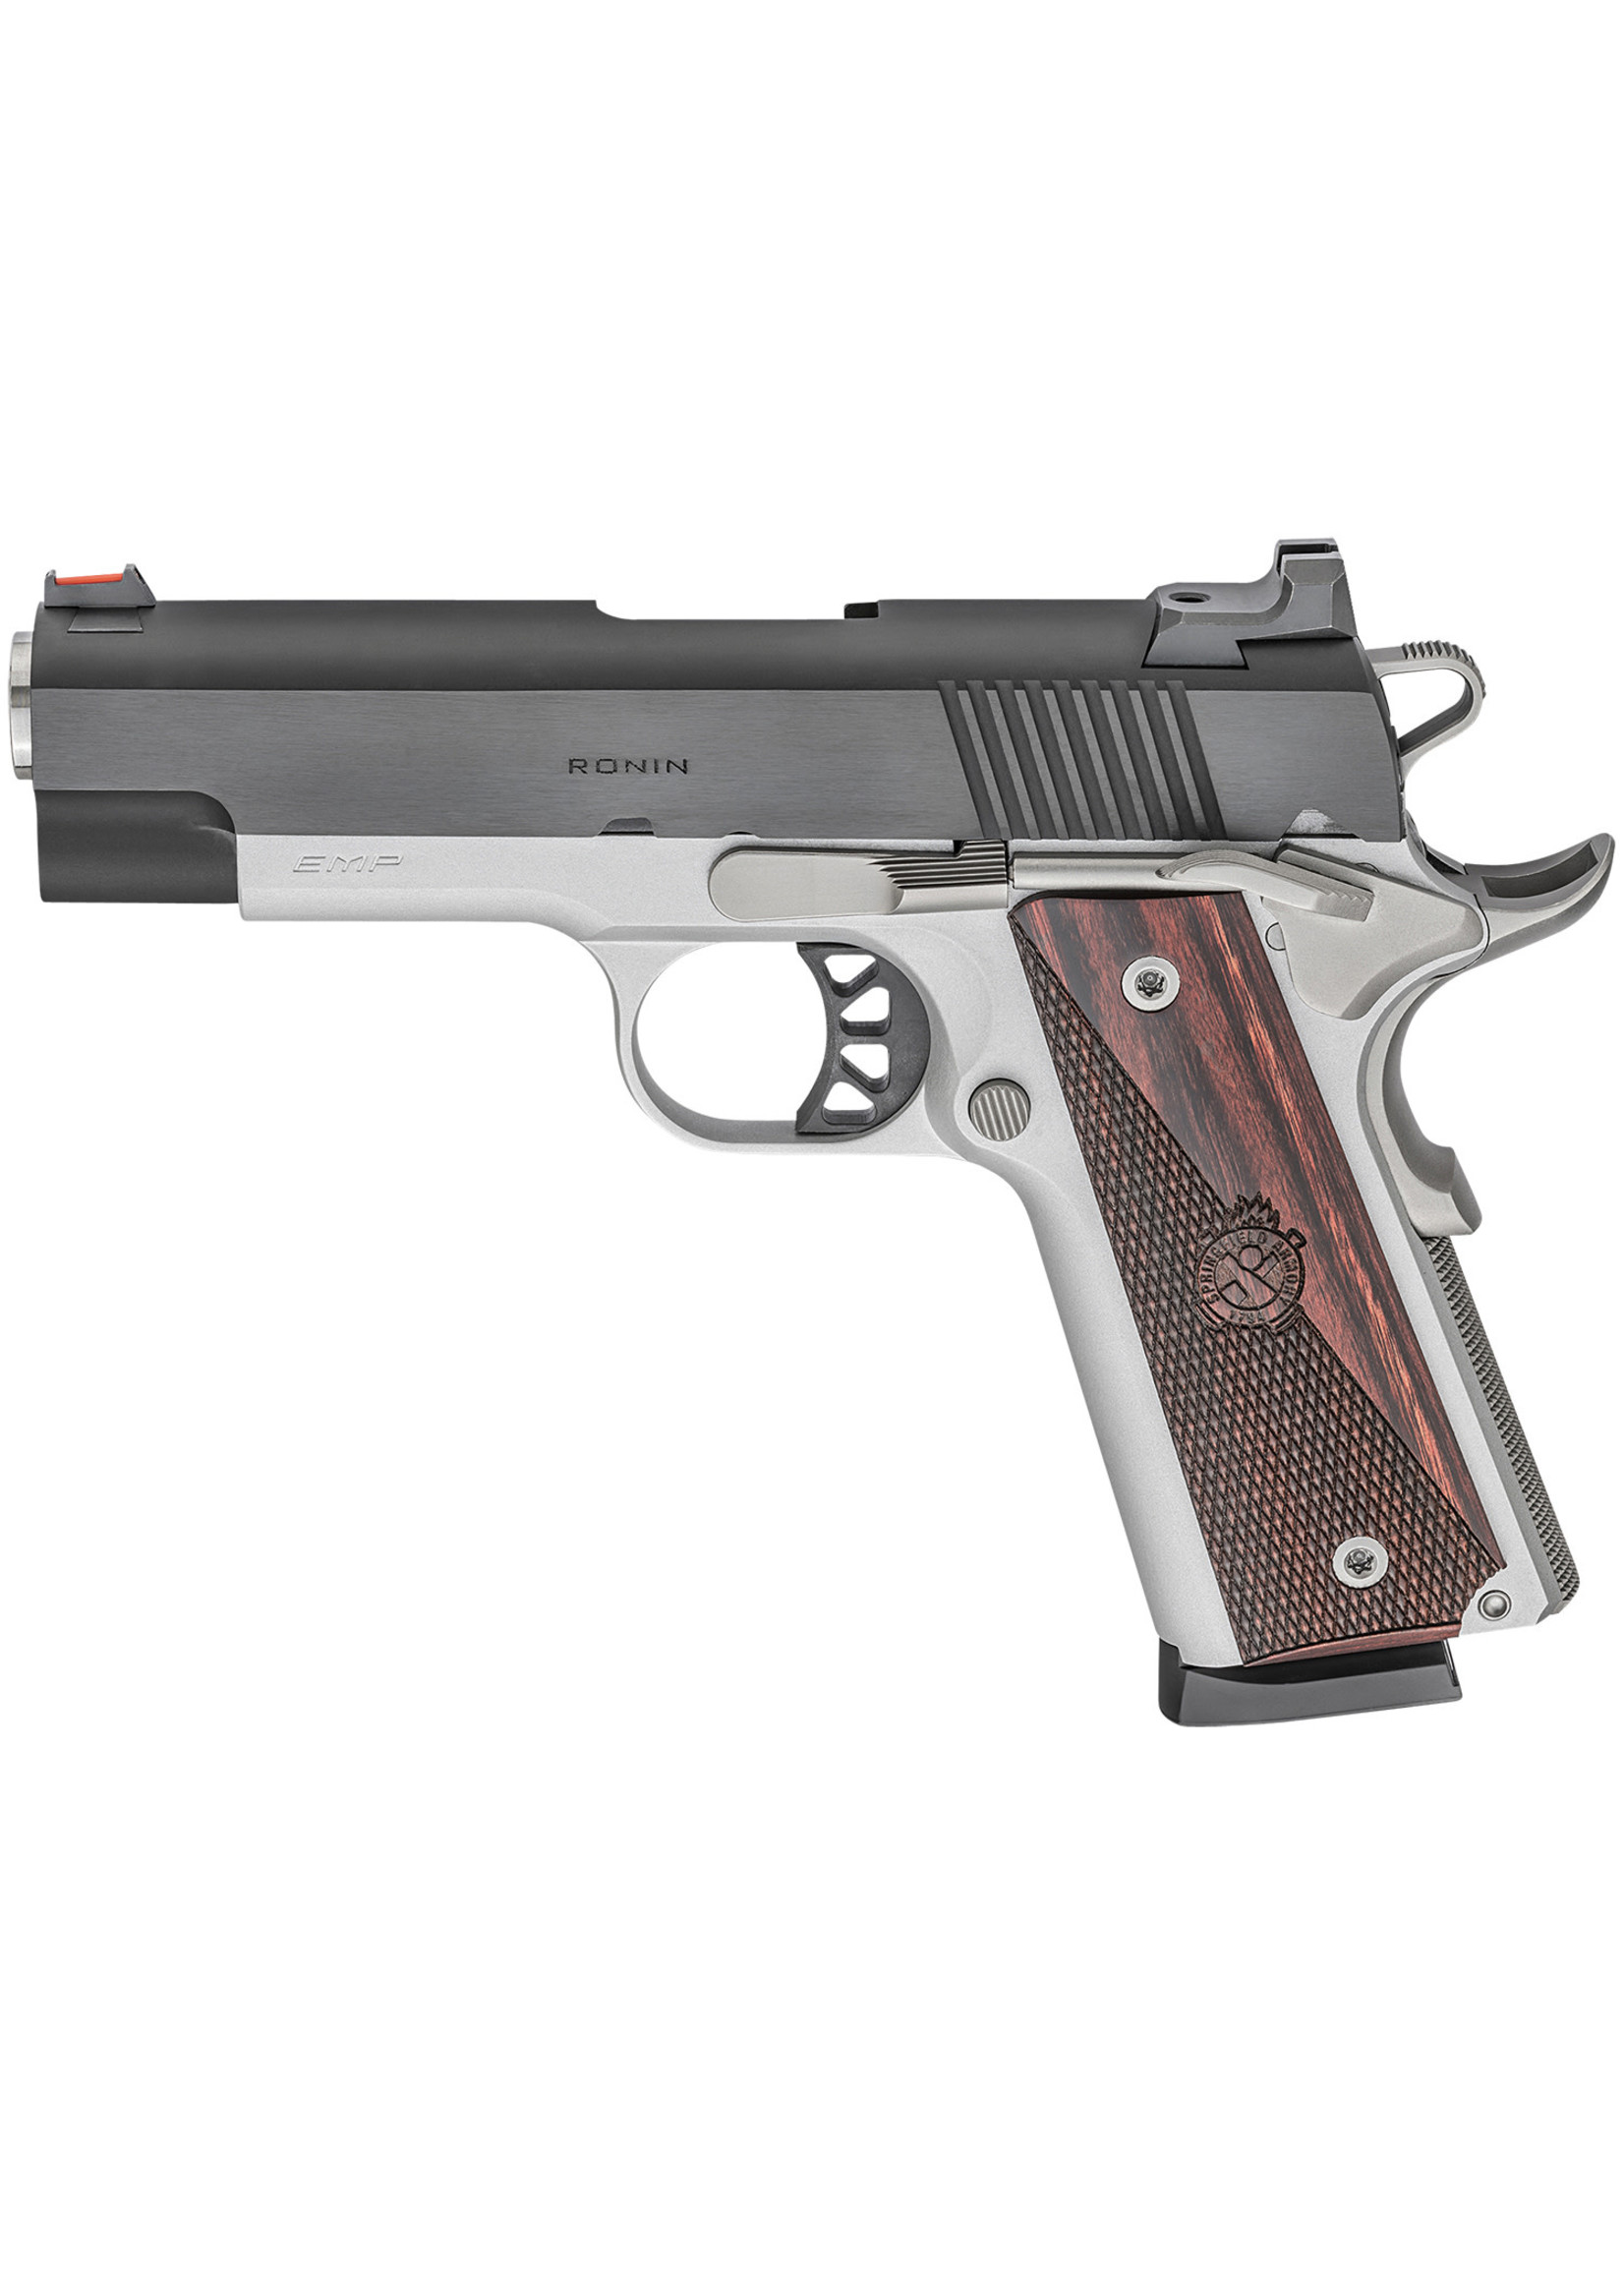 Springfield Armory Springfield Armory 1911 Ronin EMP 9mm Luger Caliber with 4" Barrel, 10+1 Capacity, Satin Aluminum Cerakote Finish Beavertail Frame, Serrated Blued Carbon Steel Slide & Textured Wood Grip